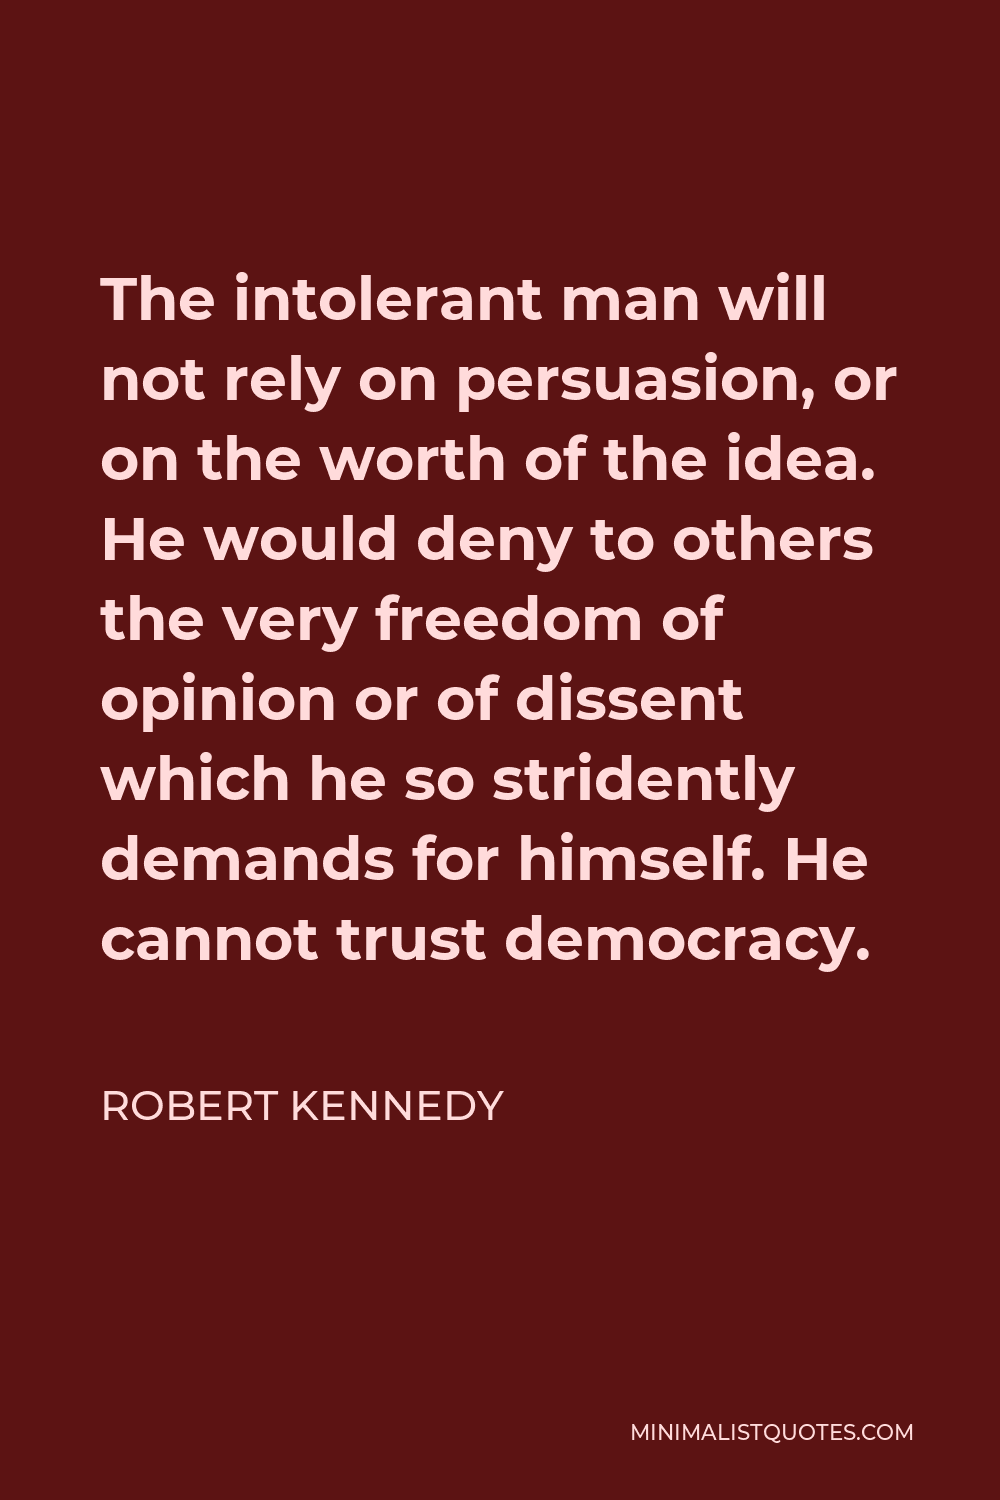 Robert Kennedy Quote - The intolerant man will not rely on persuasion, or on the worth of the idea. He would deny to others the very freedom of opinion or of dissent which he so stridently demands for himself. He cannot trust democracy.